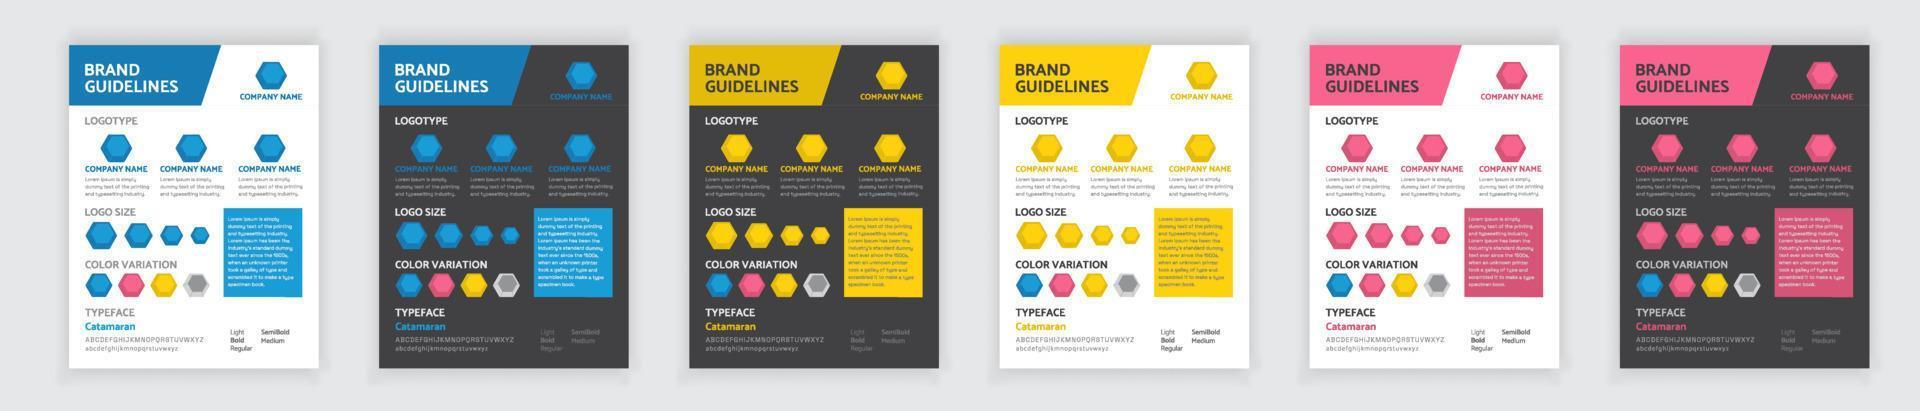 Brand Manual Templates, DIN A3 Brand Guidelines Poster Layout Set, Brand Guidelines vector